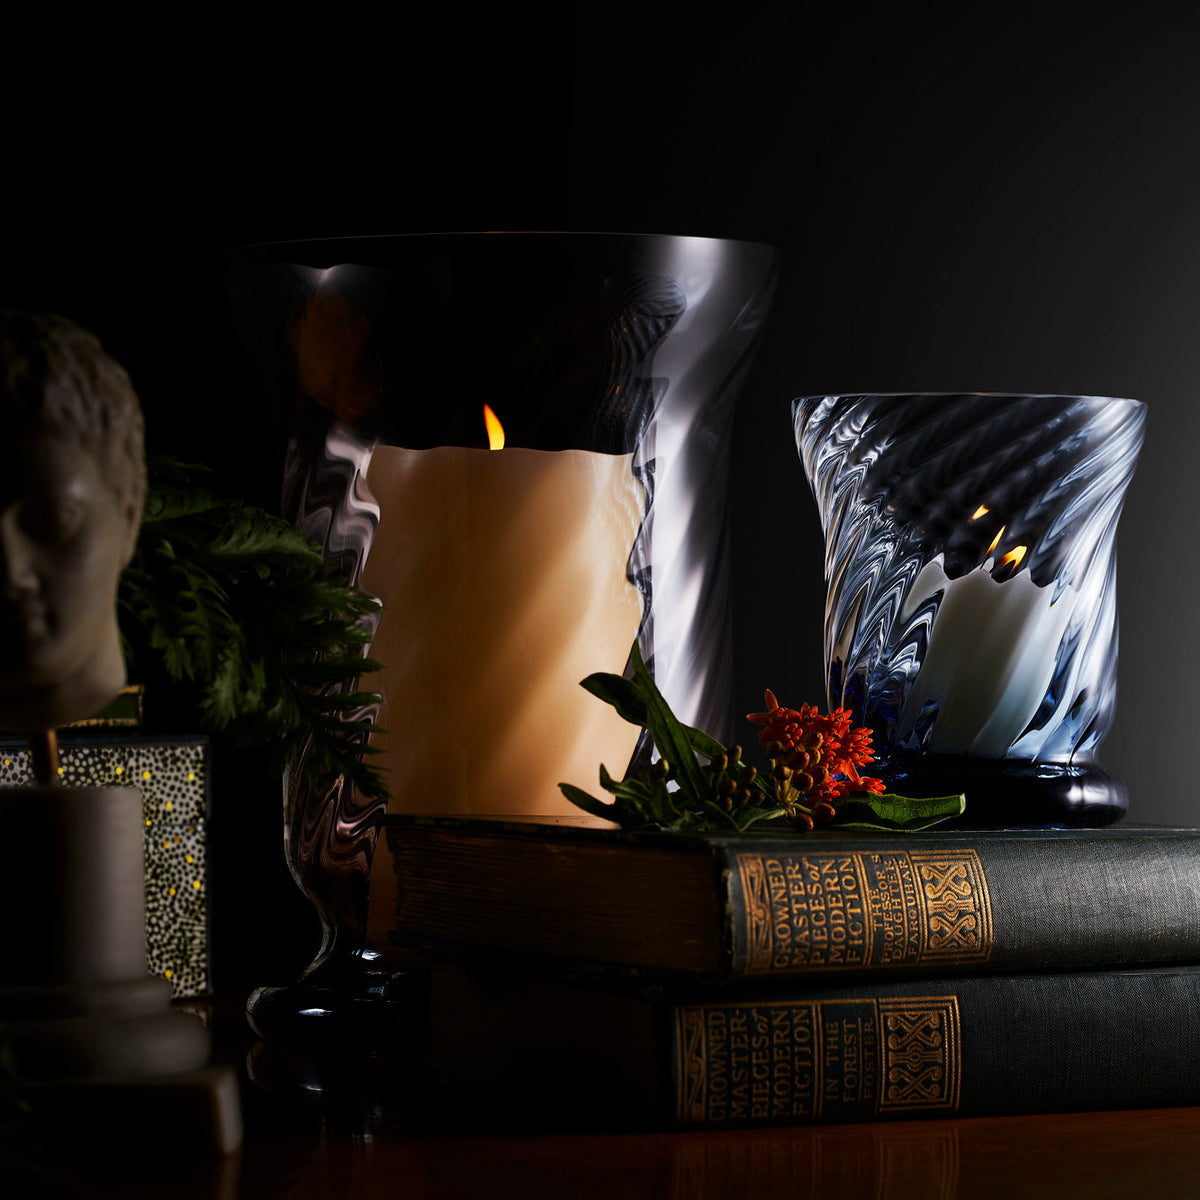 Quinn optic ocean votive candle by Caskata in lifestyle setting with stack of books and large hurricane.